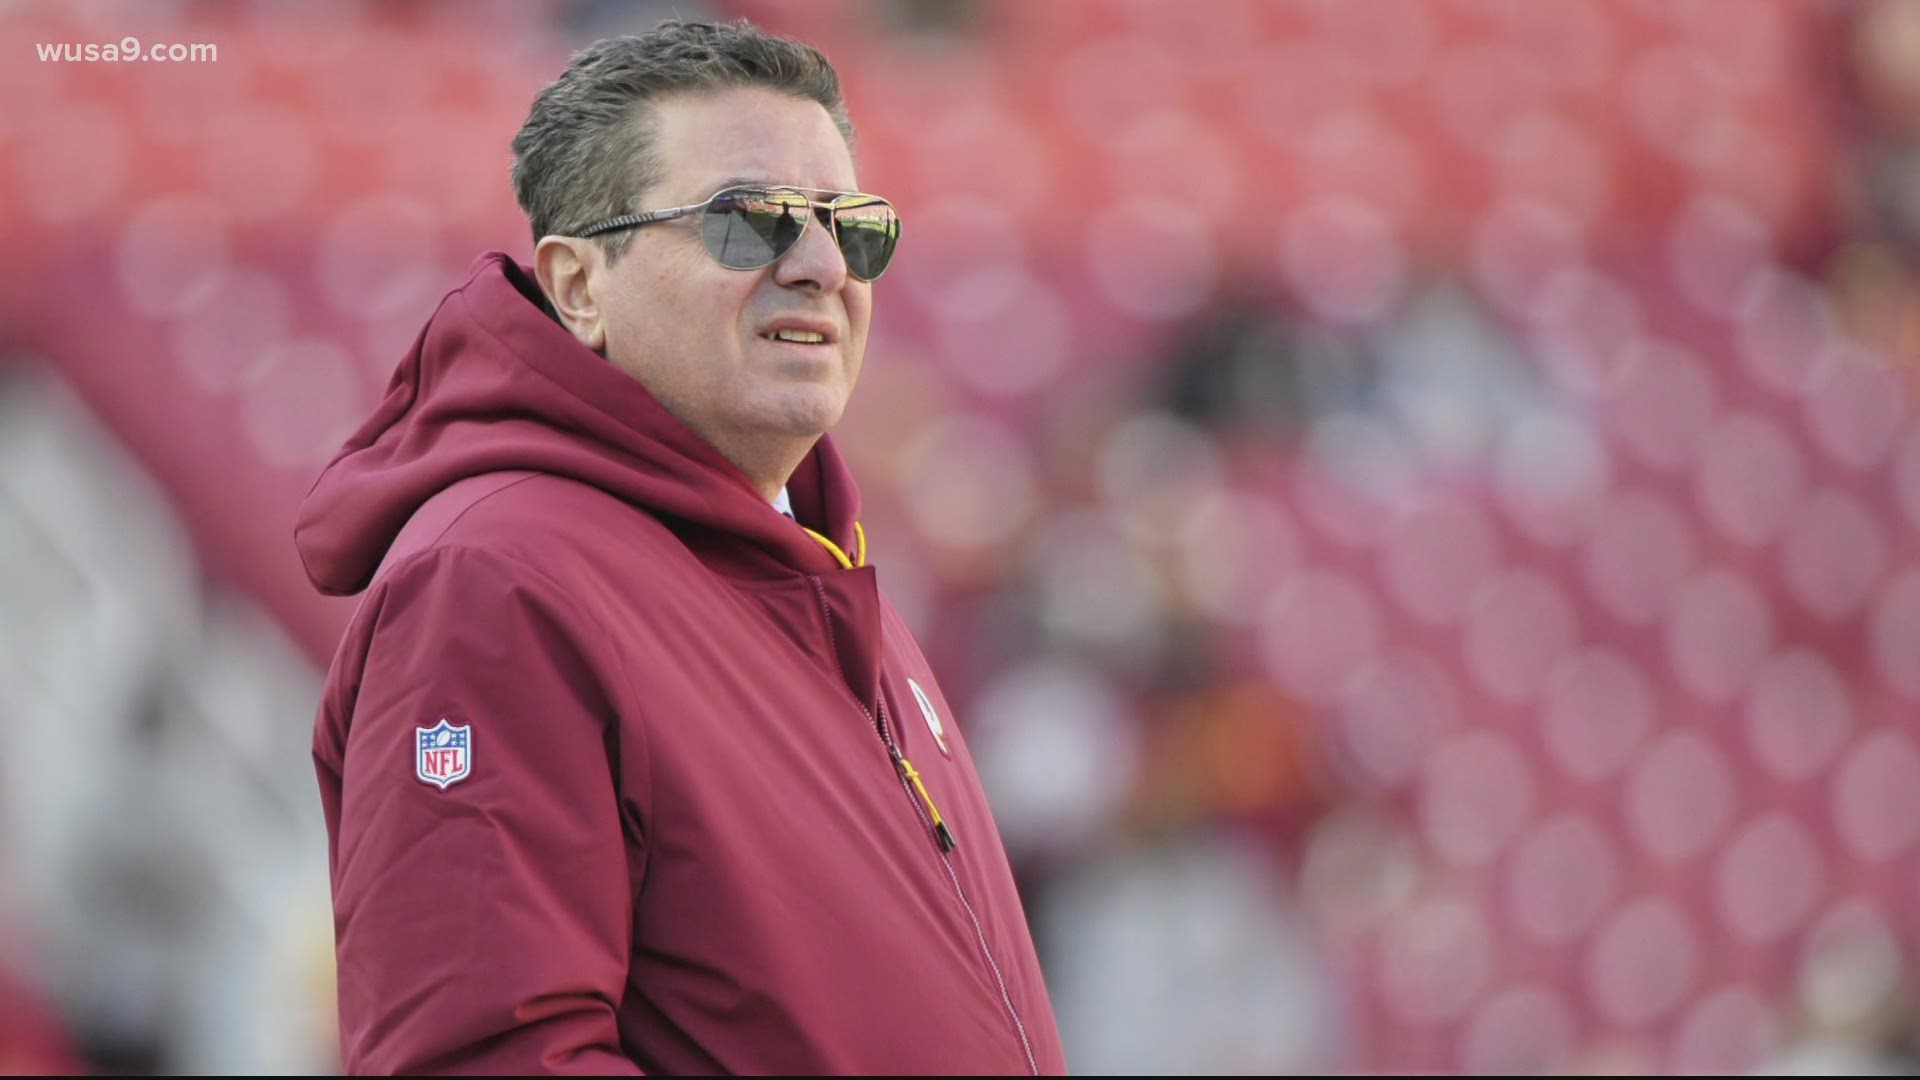 The NFL fined WFT $10 million and owner Dan Snyder is stepping away from day-to-day operations after an independent investigation into workplace misconduct.